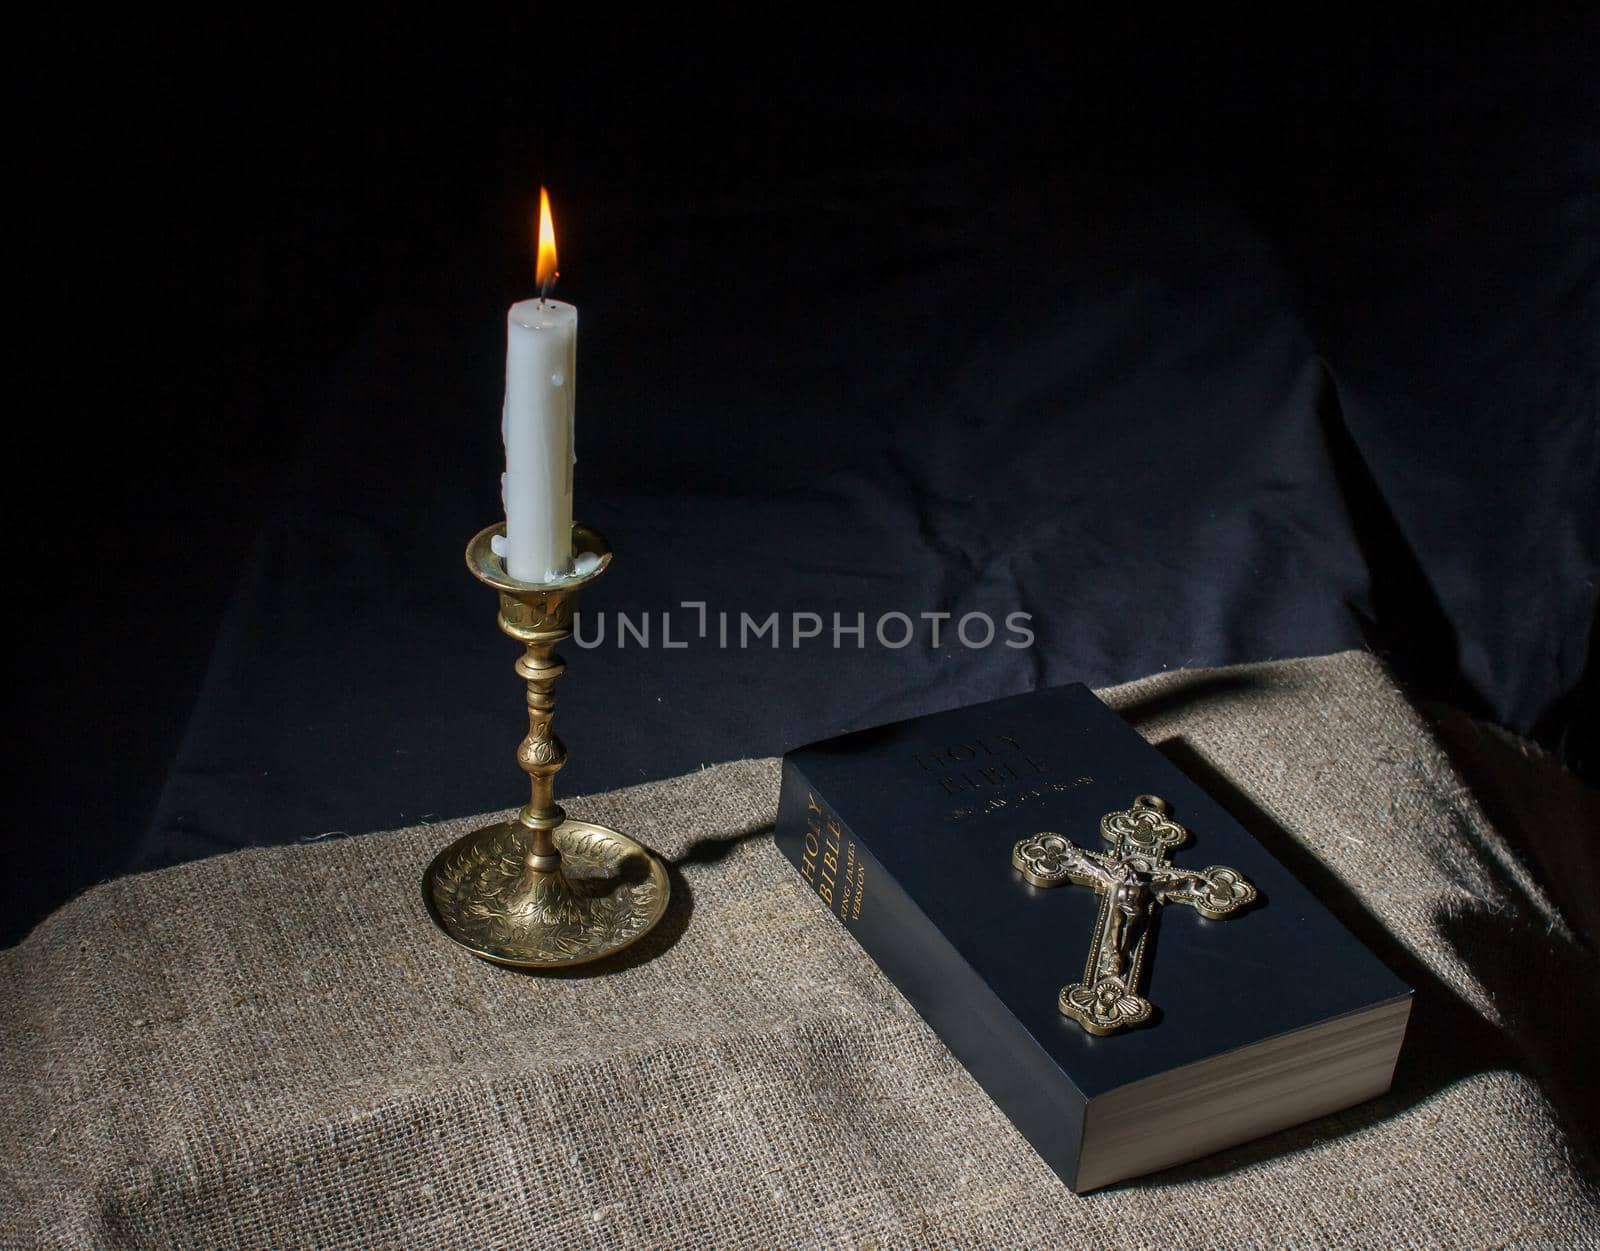 bronze cross, burning candle and bible on the table indoor closeup